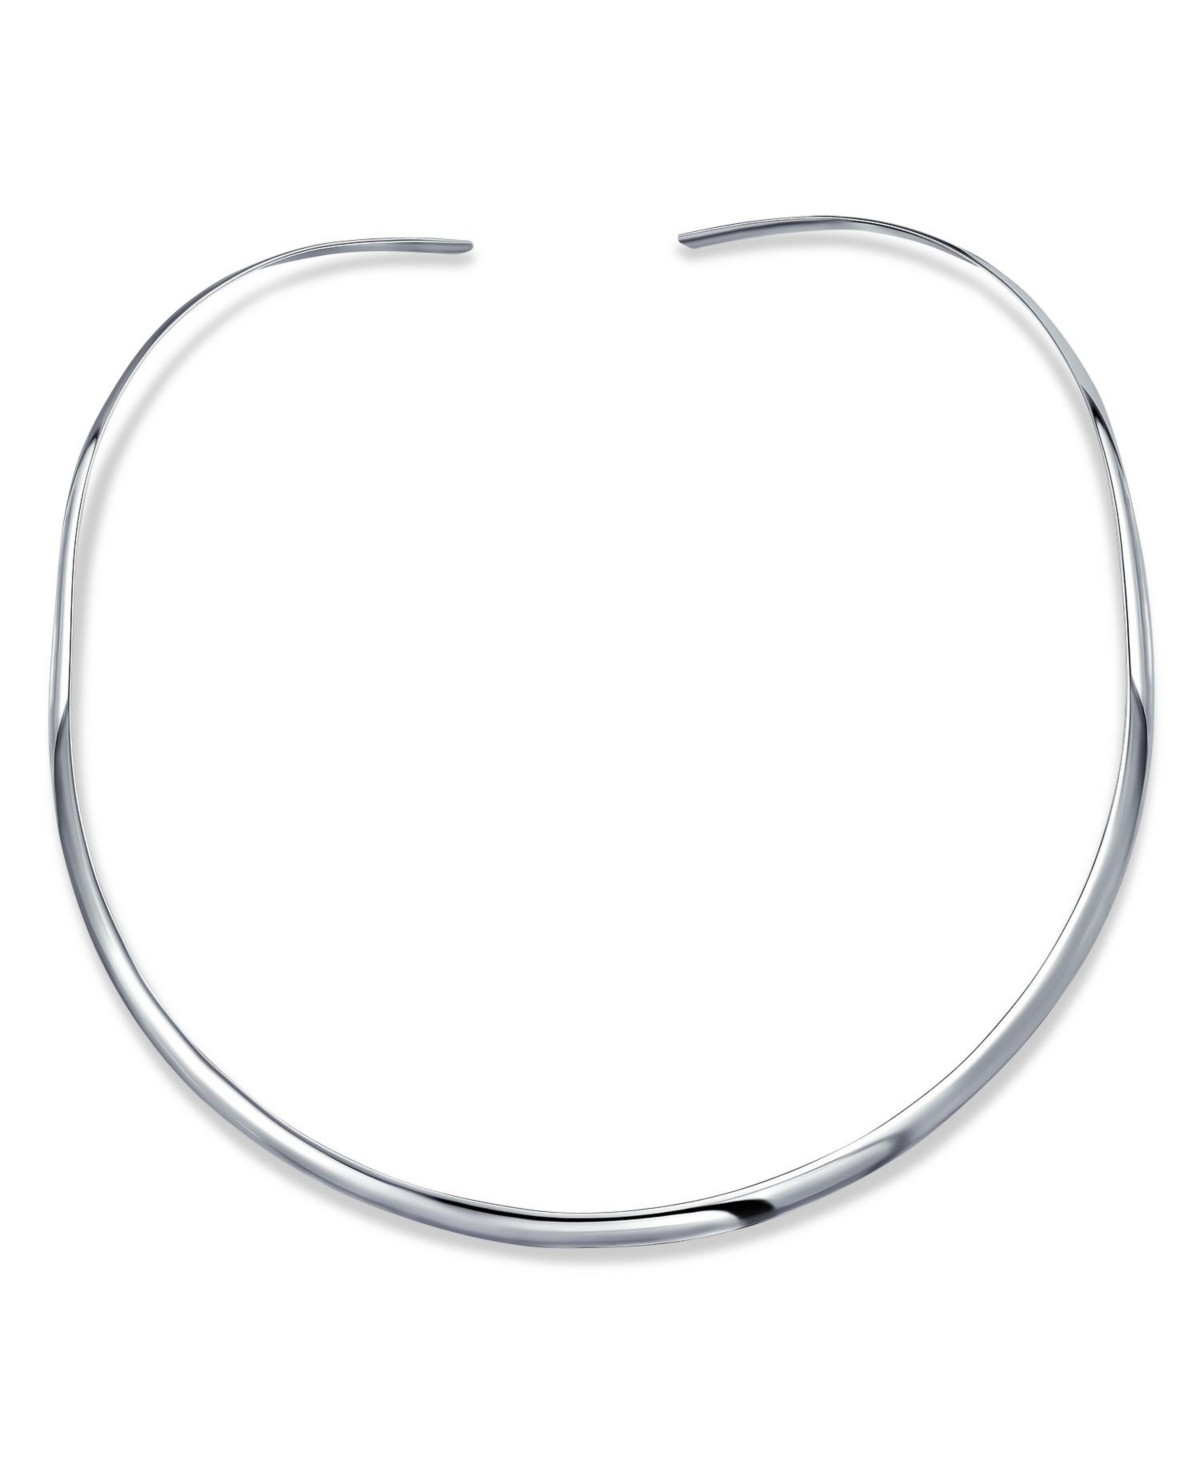 Basic Simple Thin Flat Choker Slider Open Collar Contoured Statement Necklace For Women .925 Silver Sterling 3MM - Silver